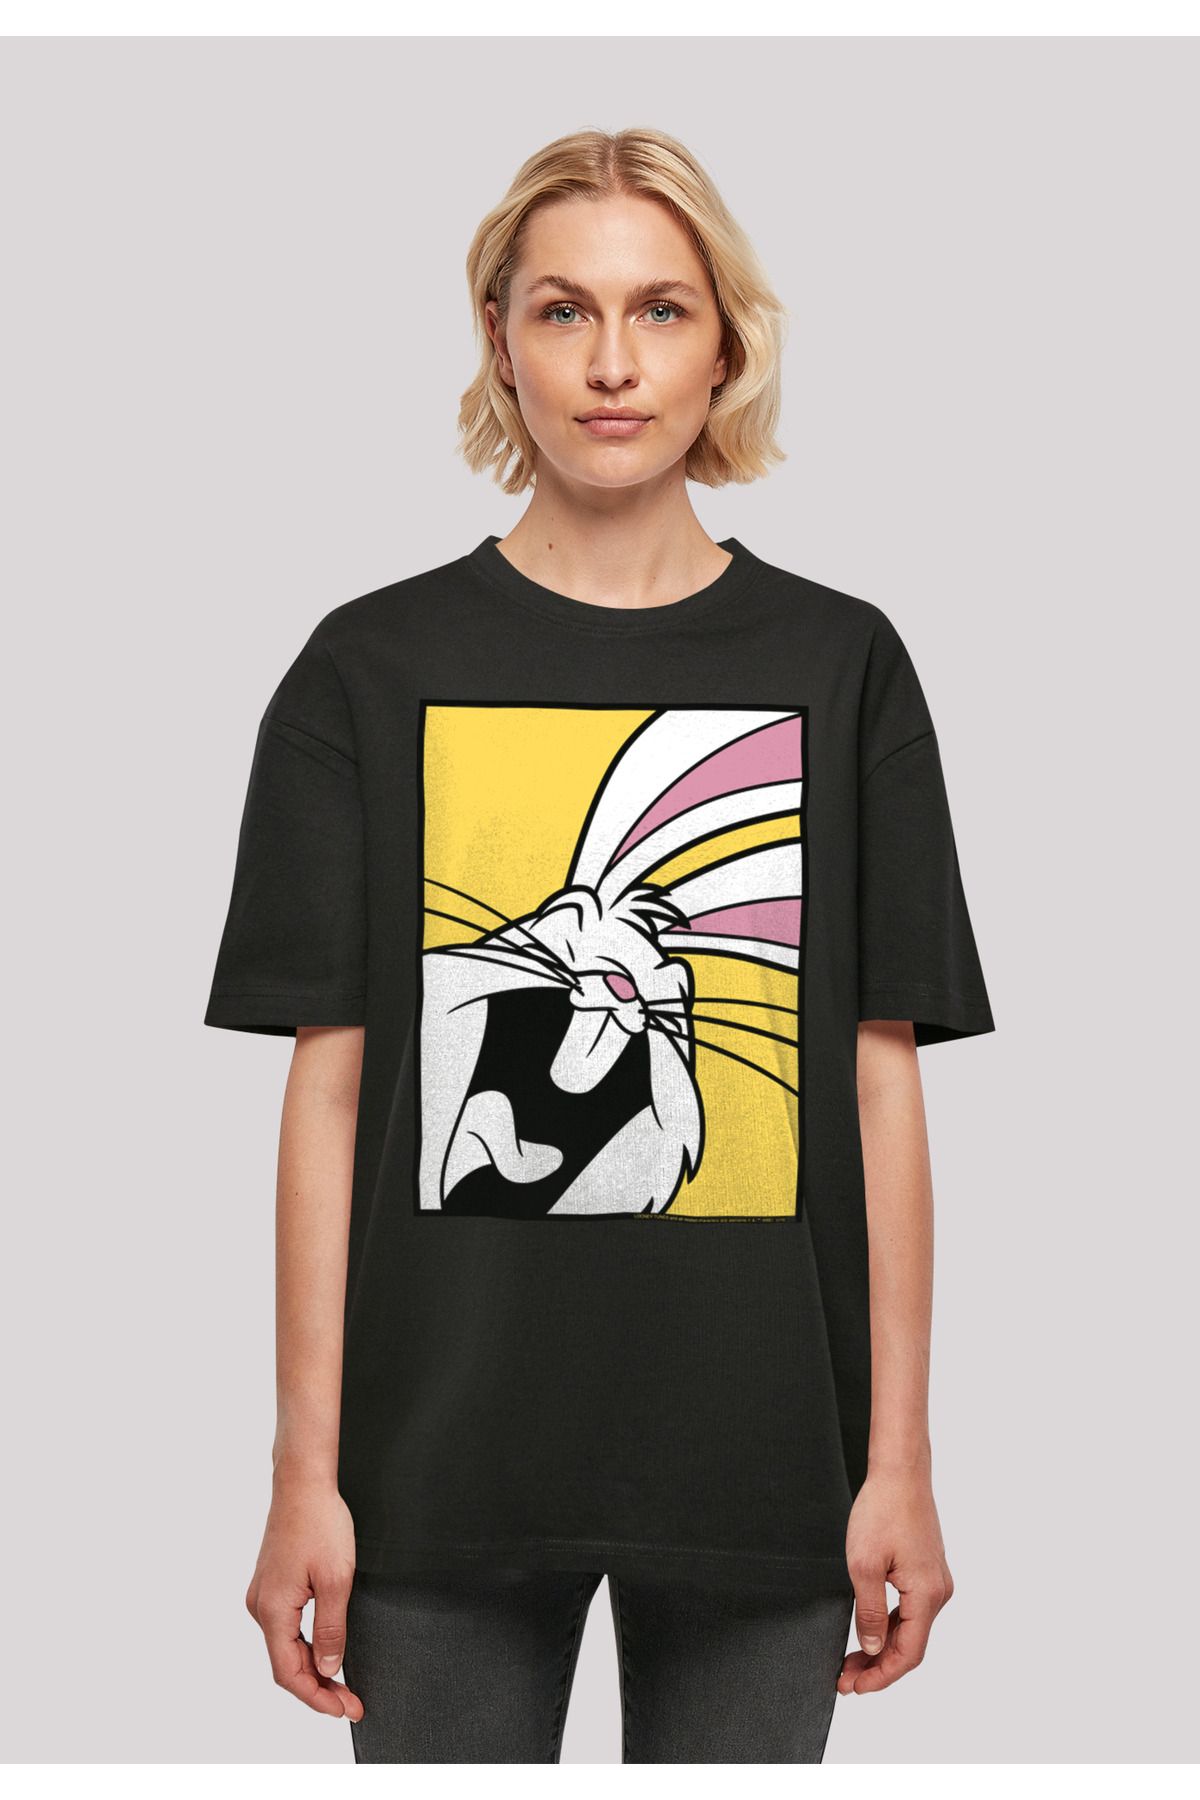 F4NT4STIC Damen Ladies Laughing T-Shirt Looney Trendyol Oversized Tunes with Bugs Boyfriend Bunny 